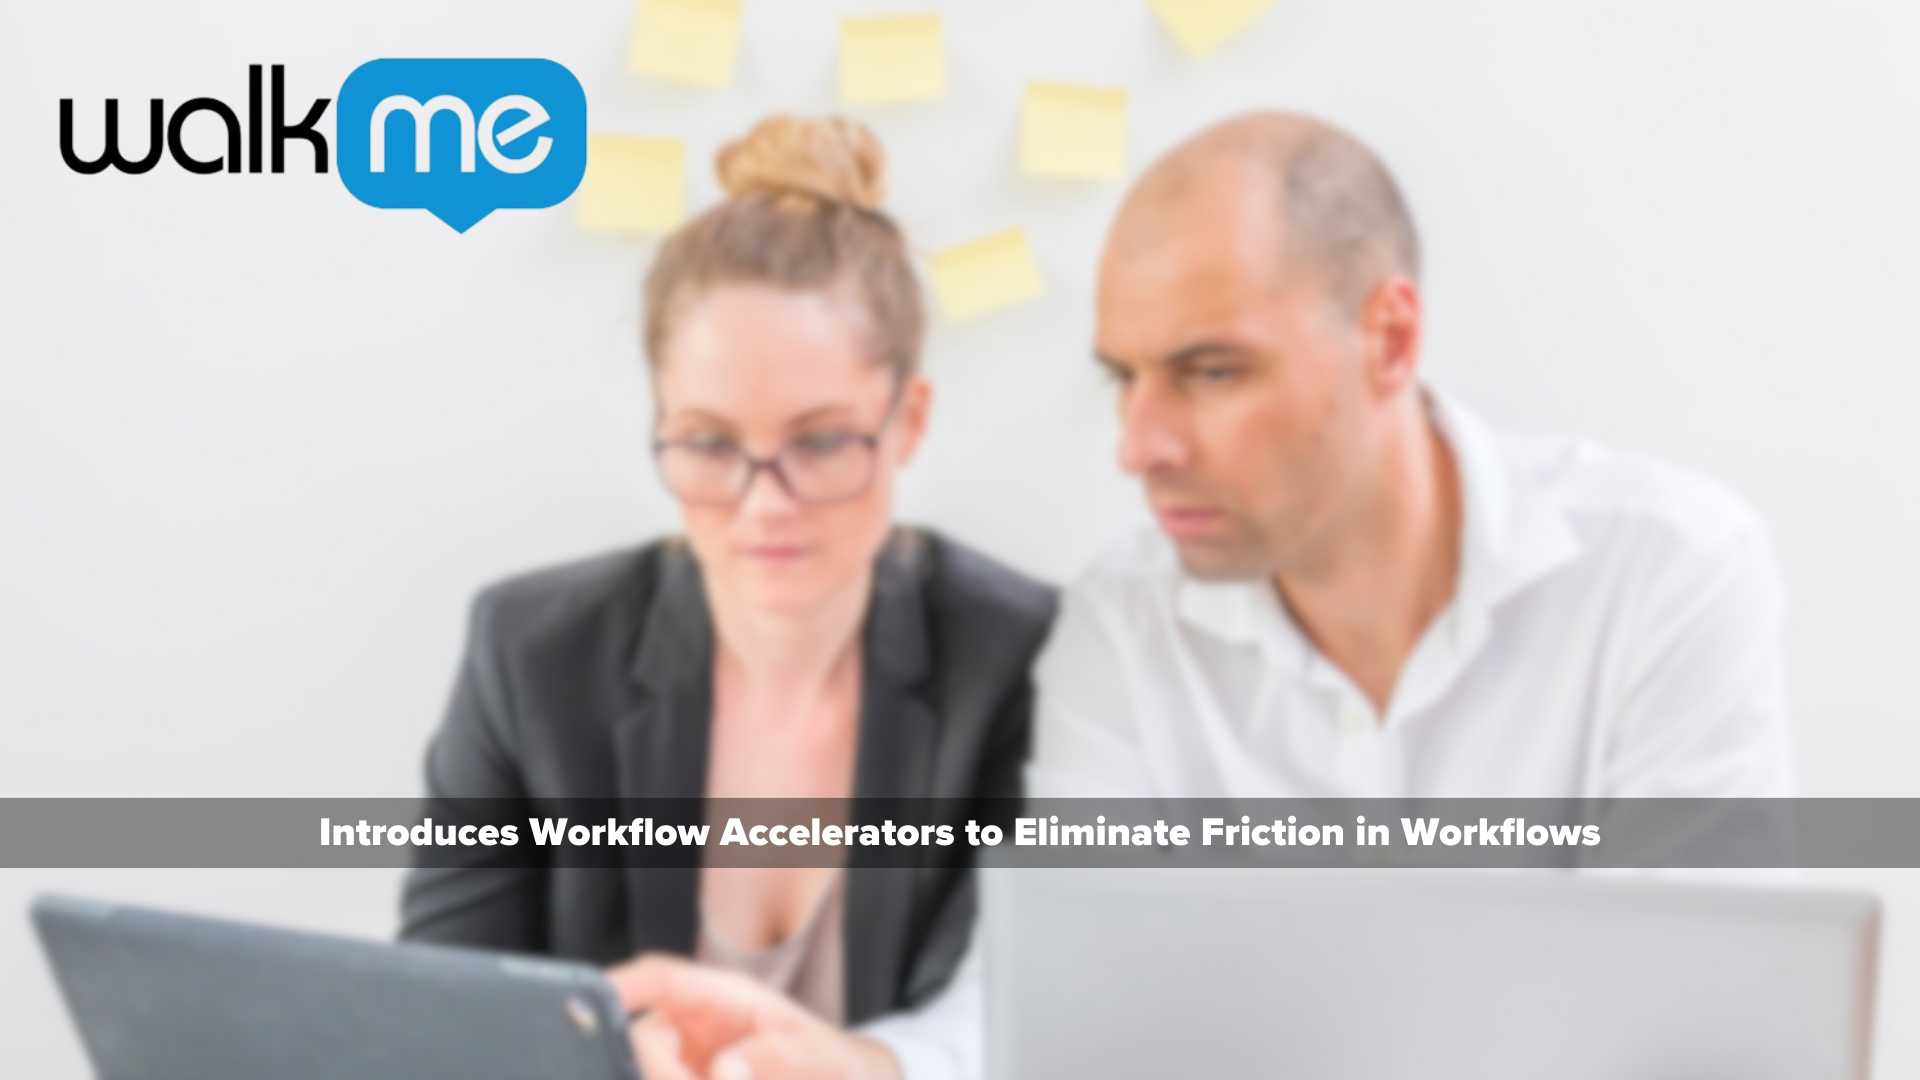 WalkMe Introduces Workflow Accelerators to Eliminate Friction in Workflows